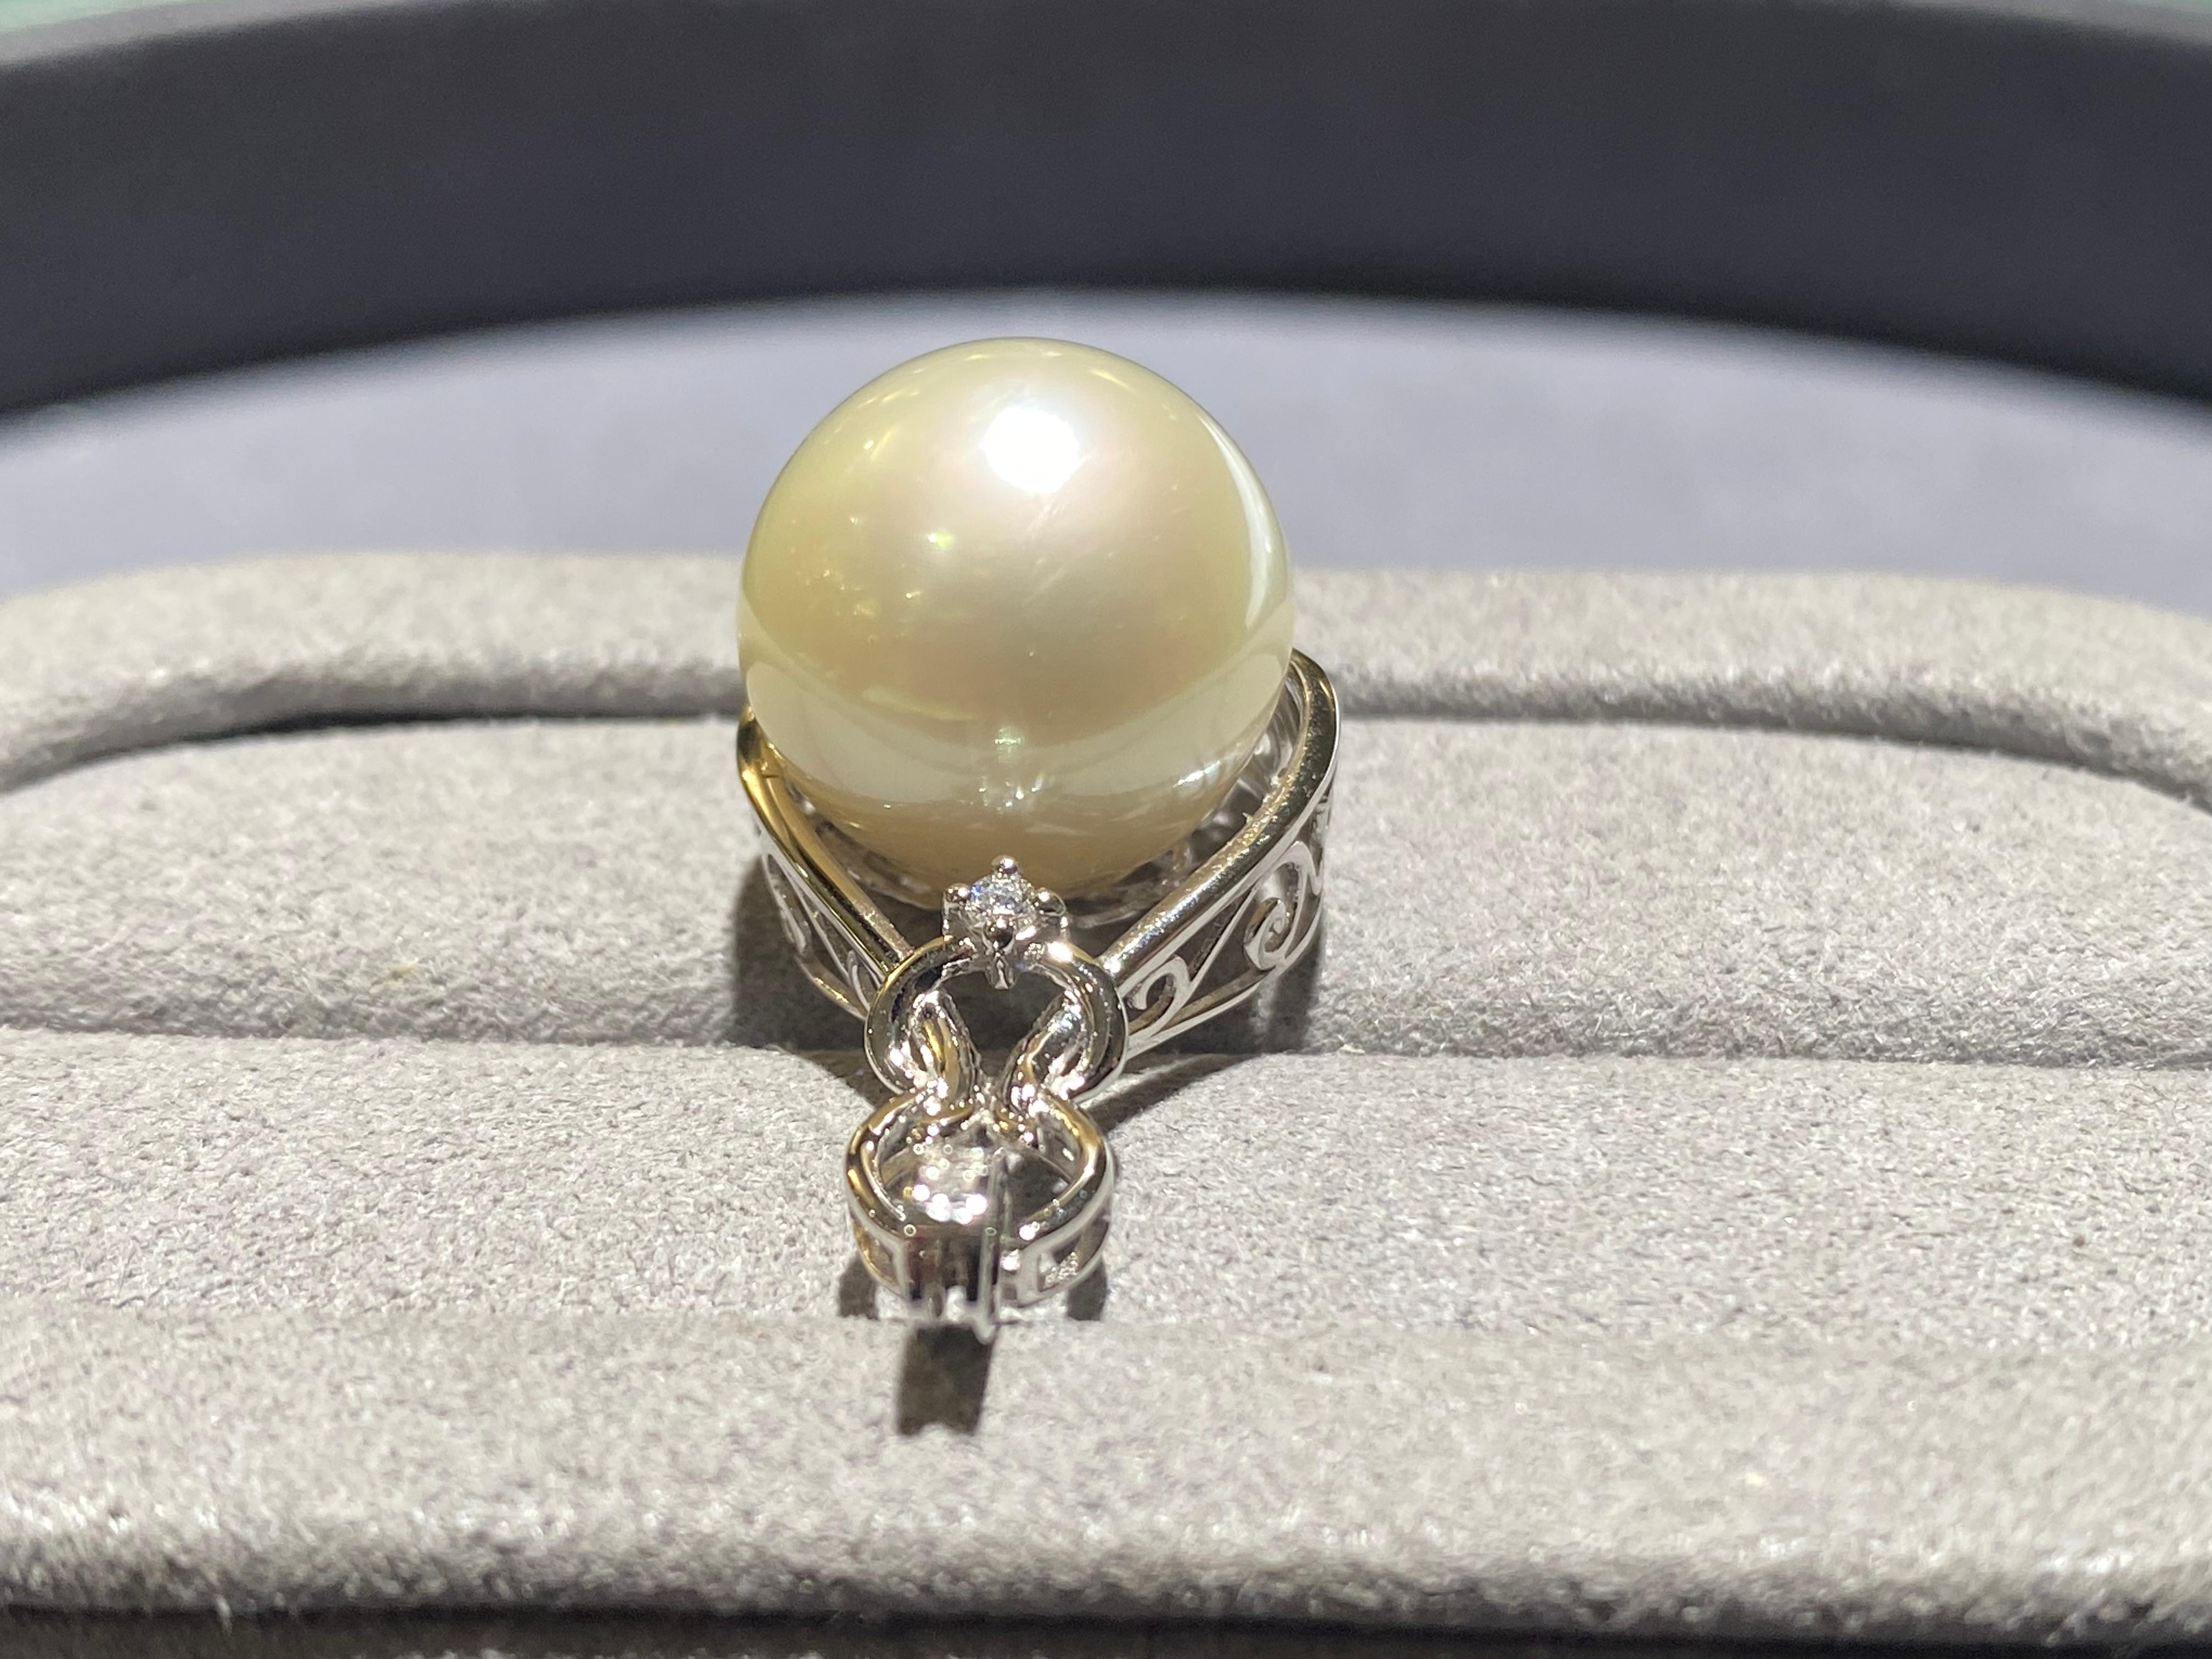 A round 13.5 mm white australian south sea pearl and diamond pendant in 18k white gold. The pearl is set at the bottom of the rain drop and there is a diamond set directly above the pearl. The bale is also set with diamond pave. The pearl is white